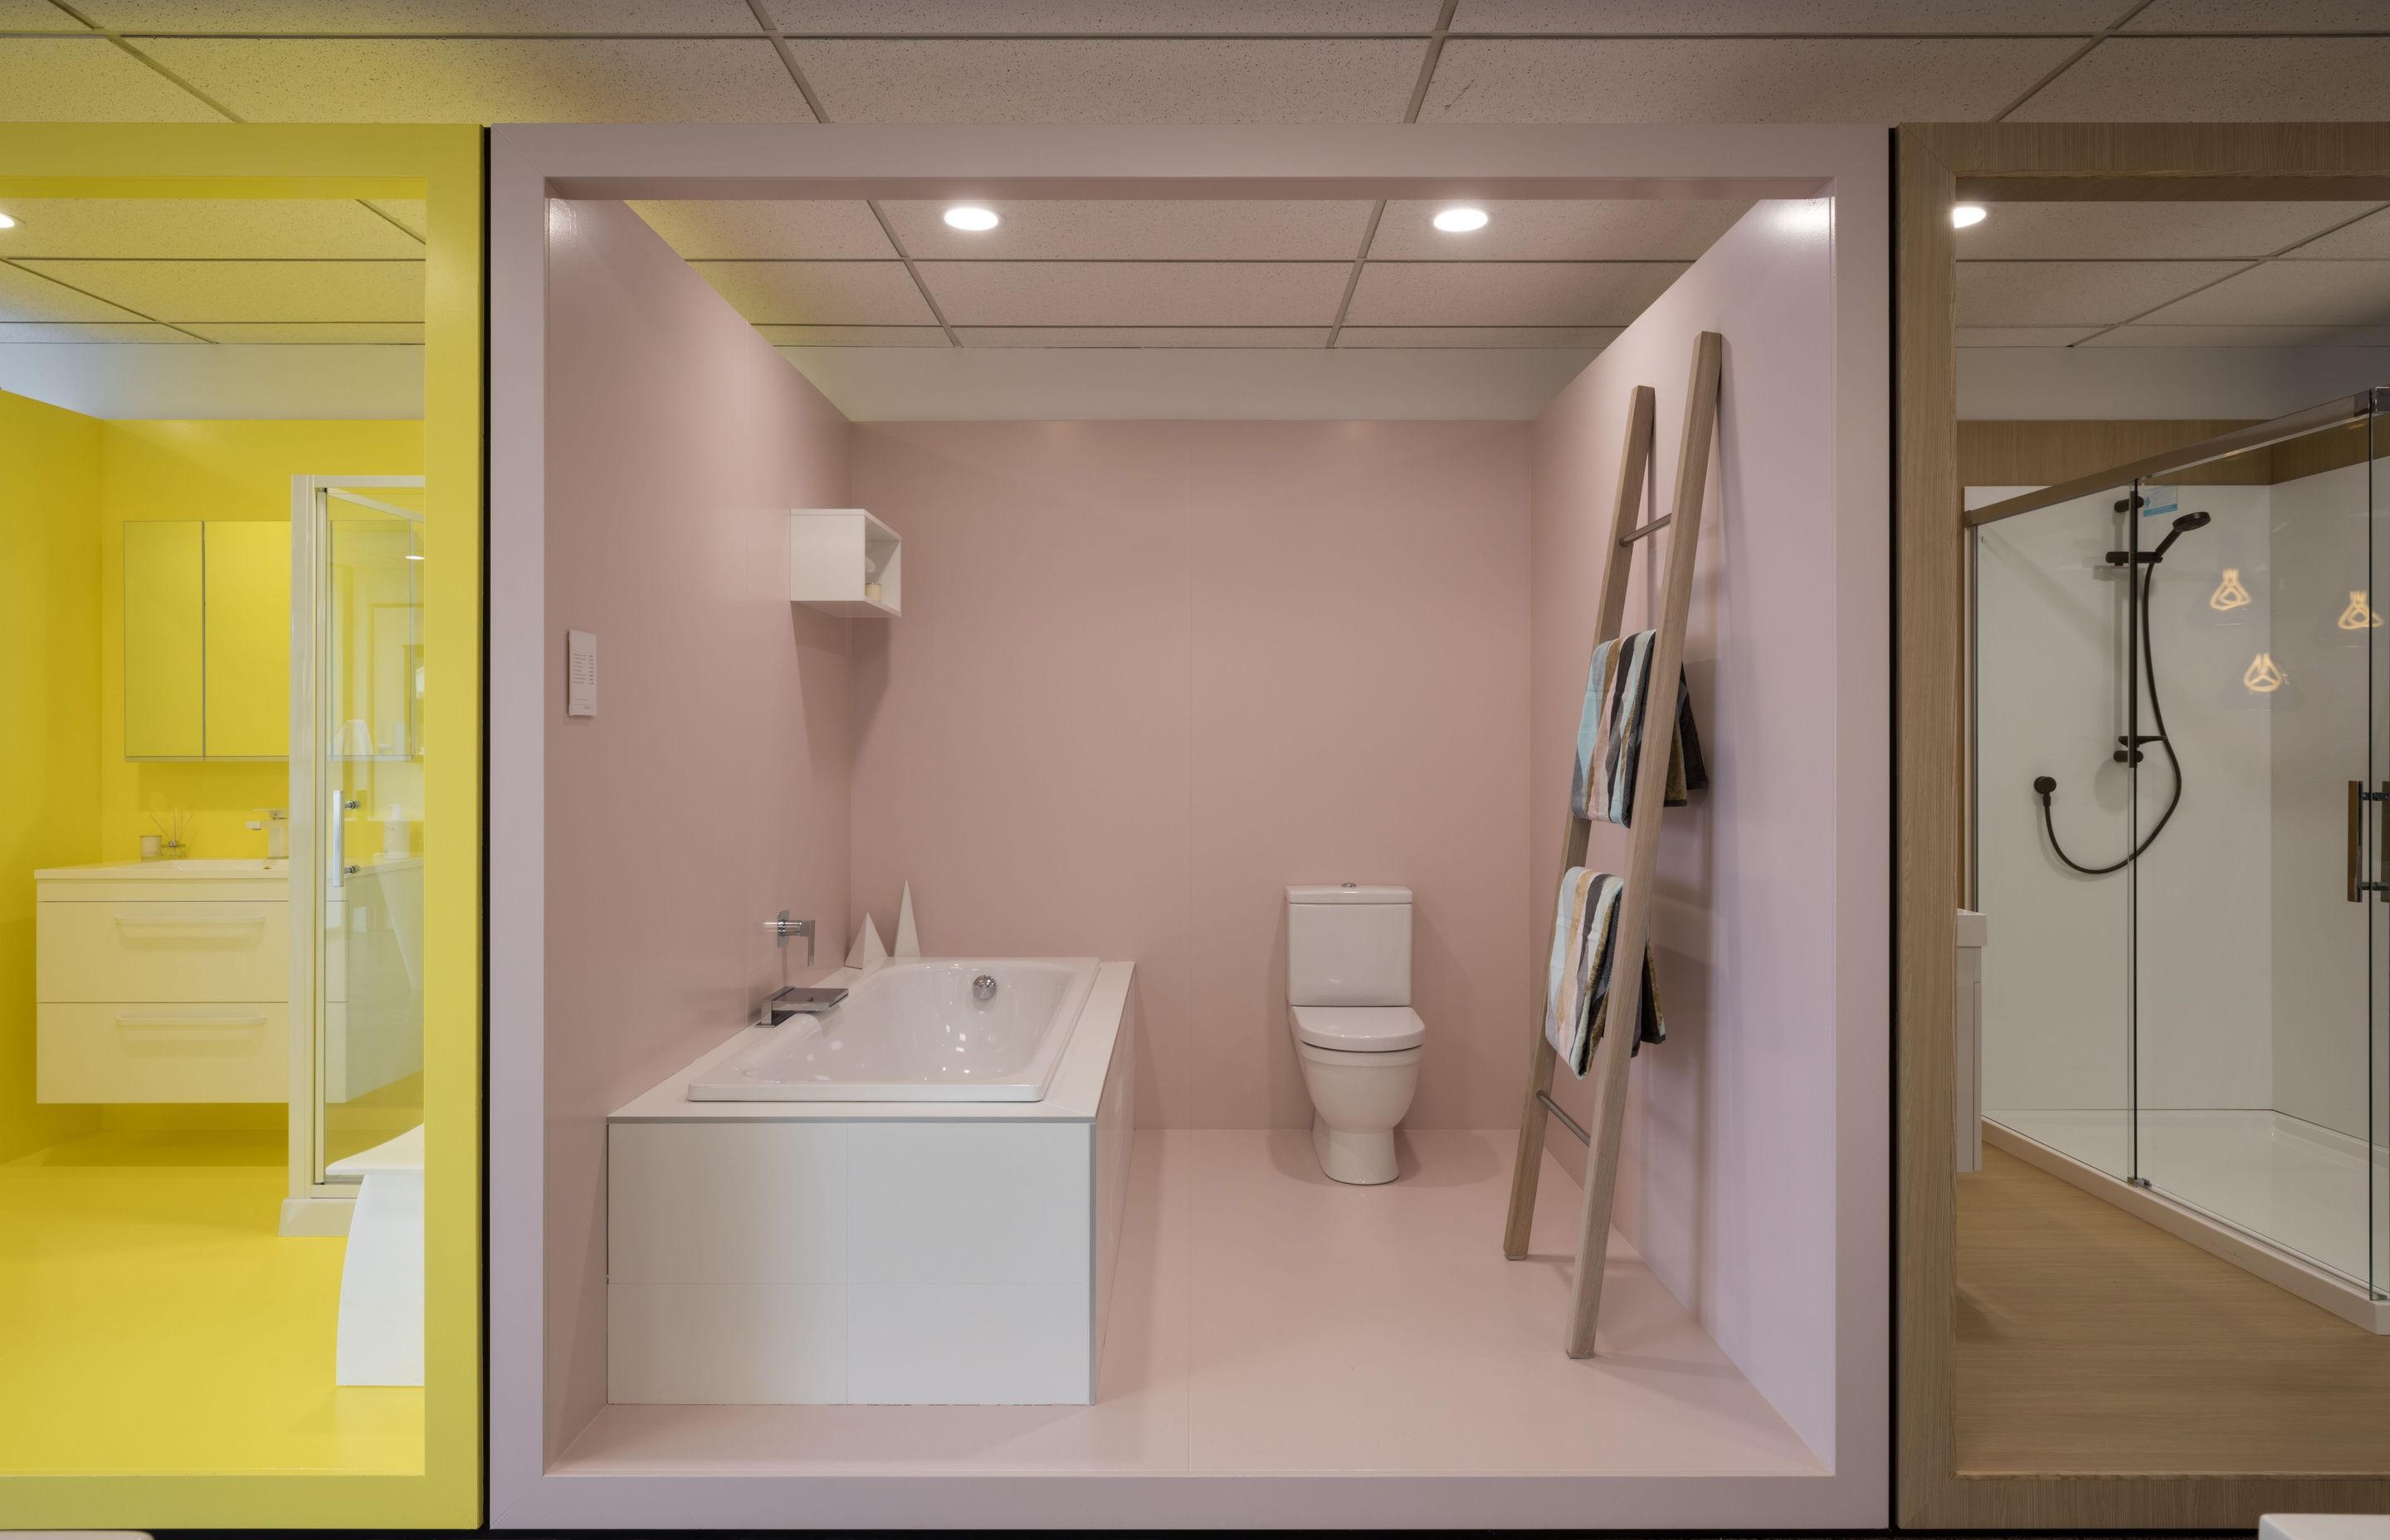 Room pods emerse the client in various moods and make the product hero: yellow, pink, wood and blue create visual interest from the street and draw clients into the showroom